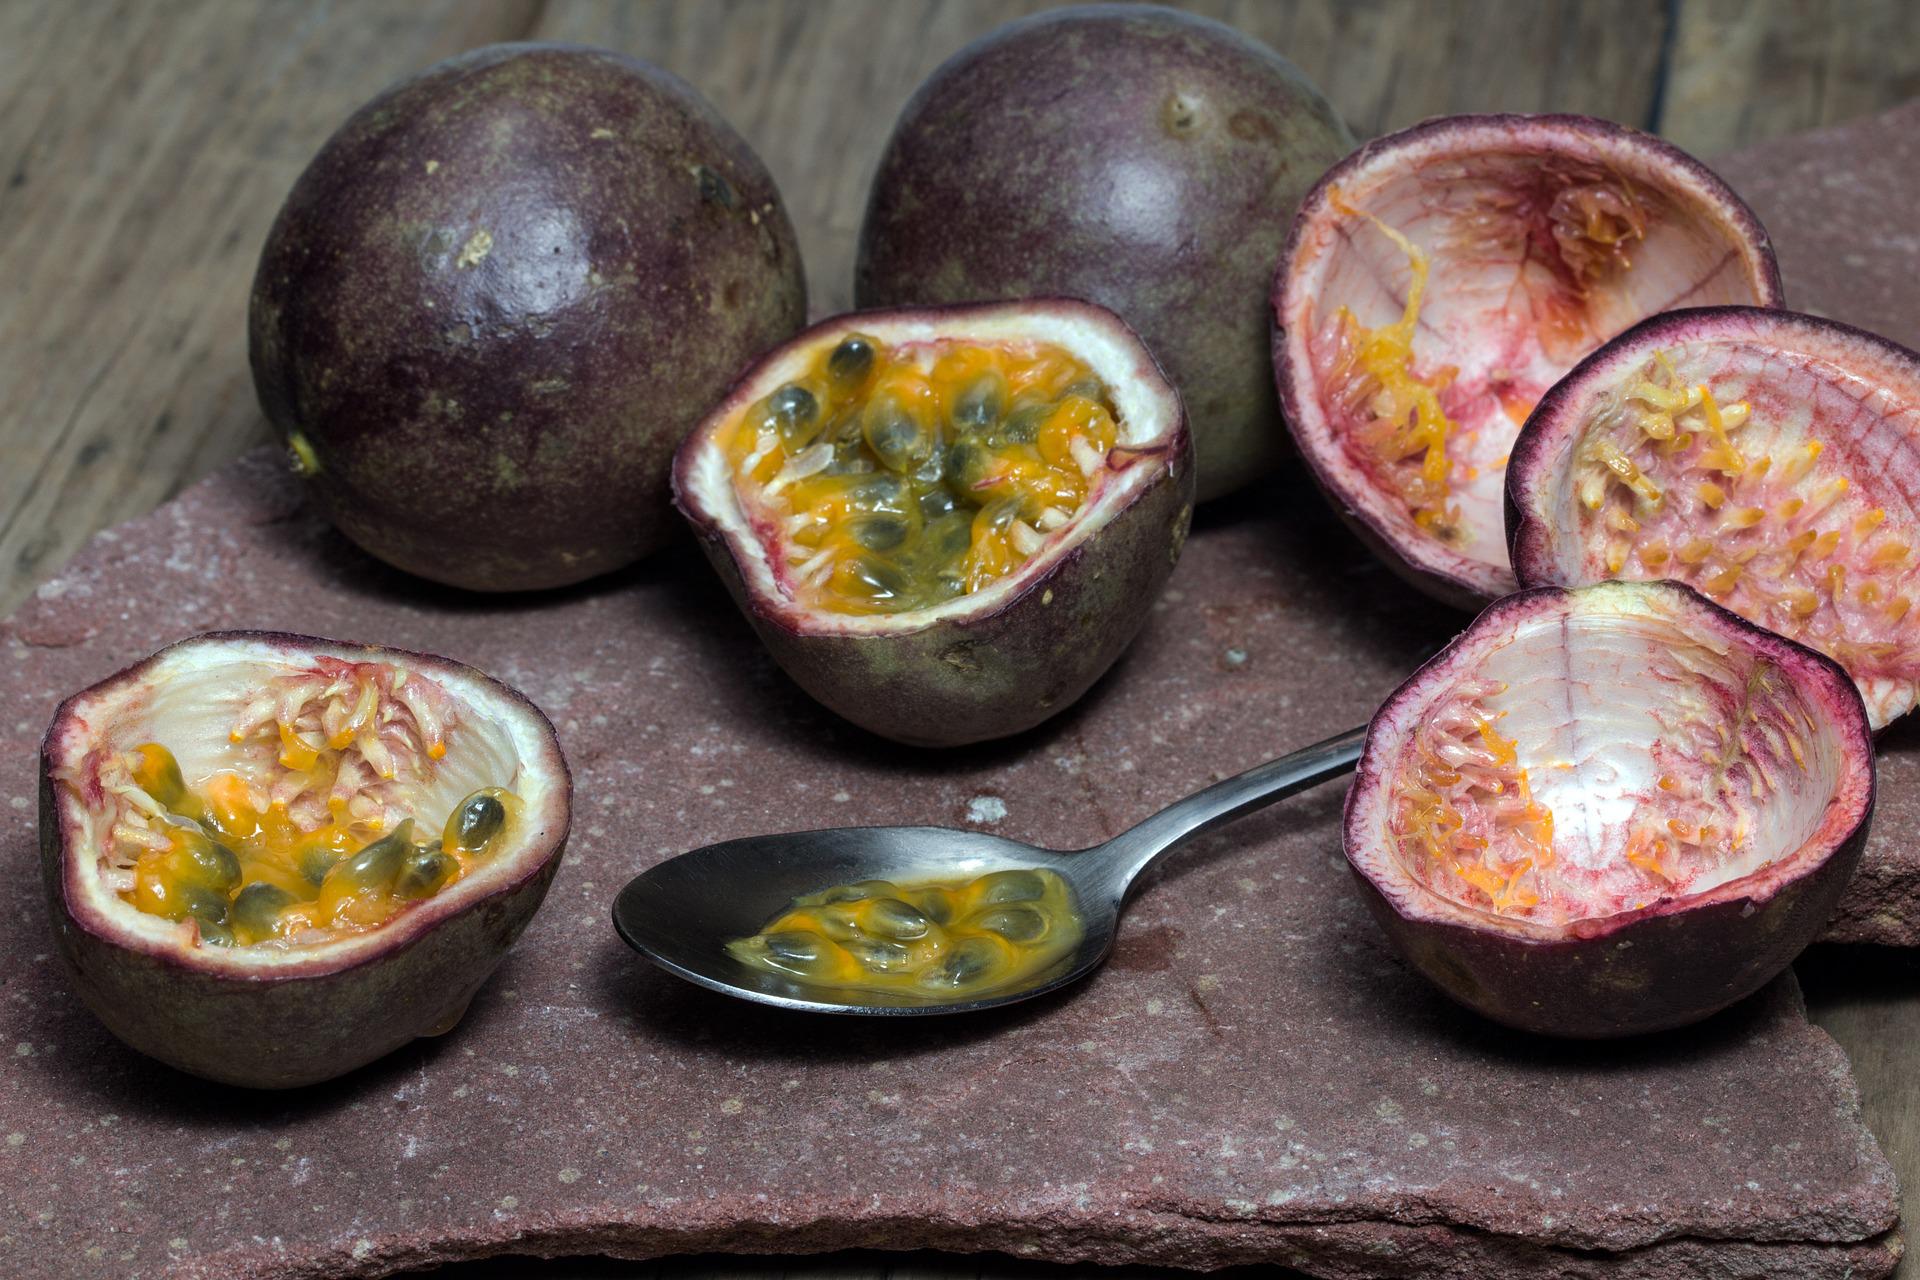 On a stone plate on an old wooden table are some passion fruit. Two remain unopened. The rest have been halved, some eaten with a small spoon.